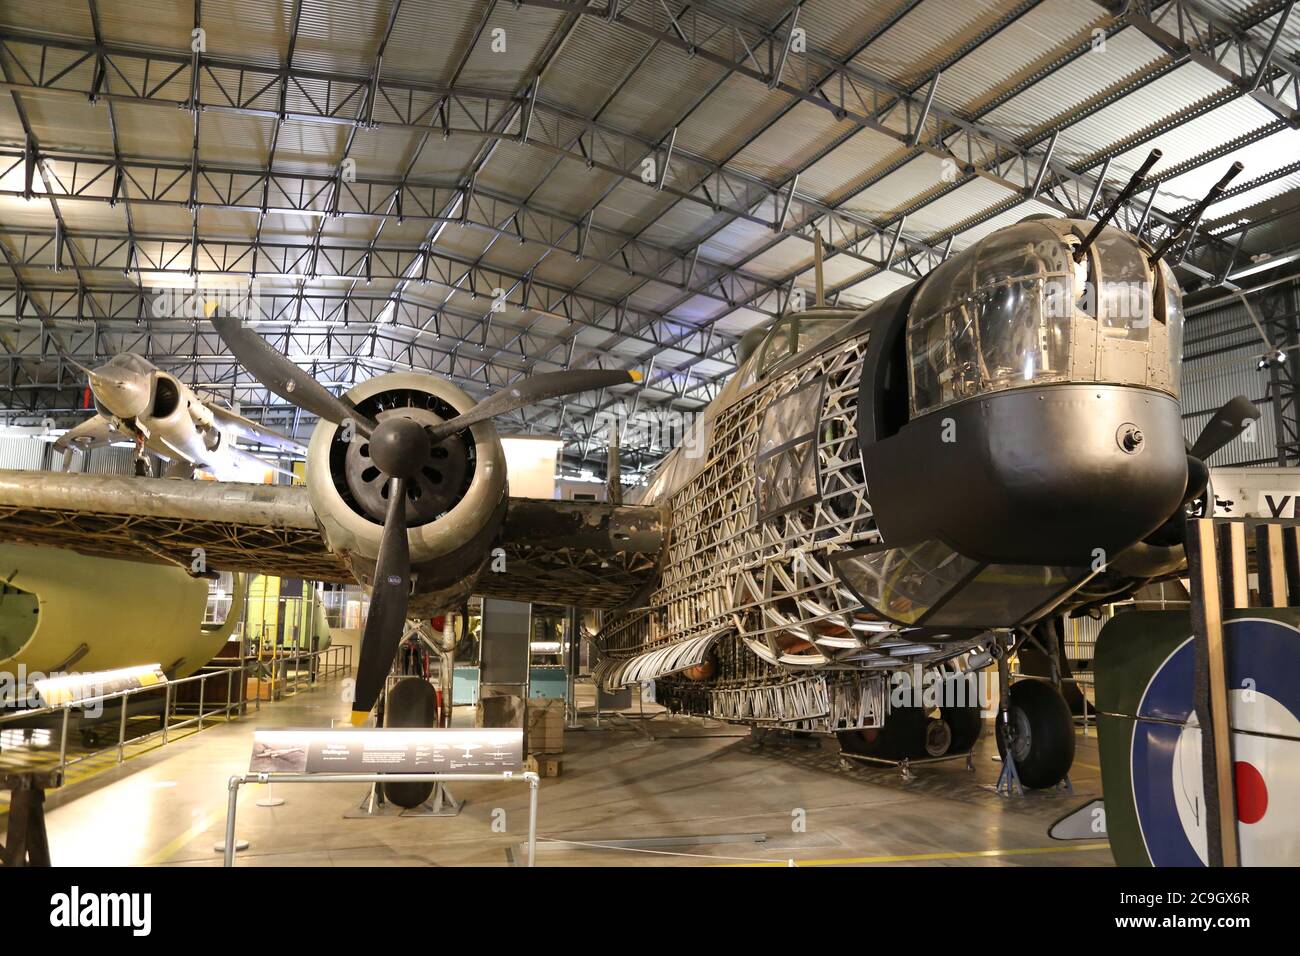 Vickers Wellington Mk1A bomber. Brooklands Museum re-opens after Covid19 lockdown, 1st Aug 2020. Weybridge, Surrey, England, Great Britain, UK, Europe Stock Photo